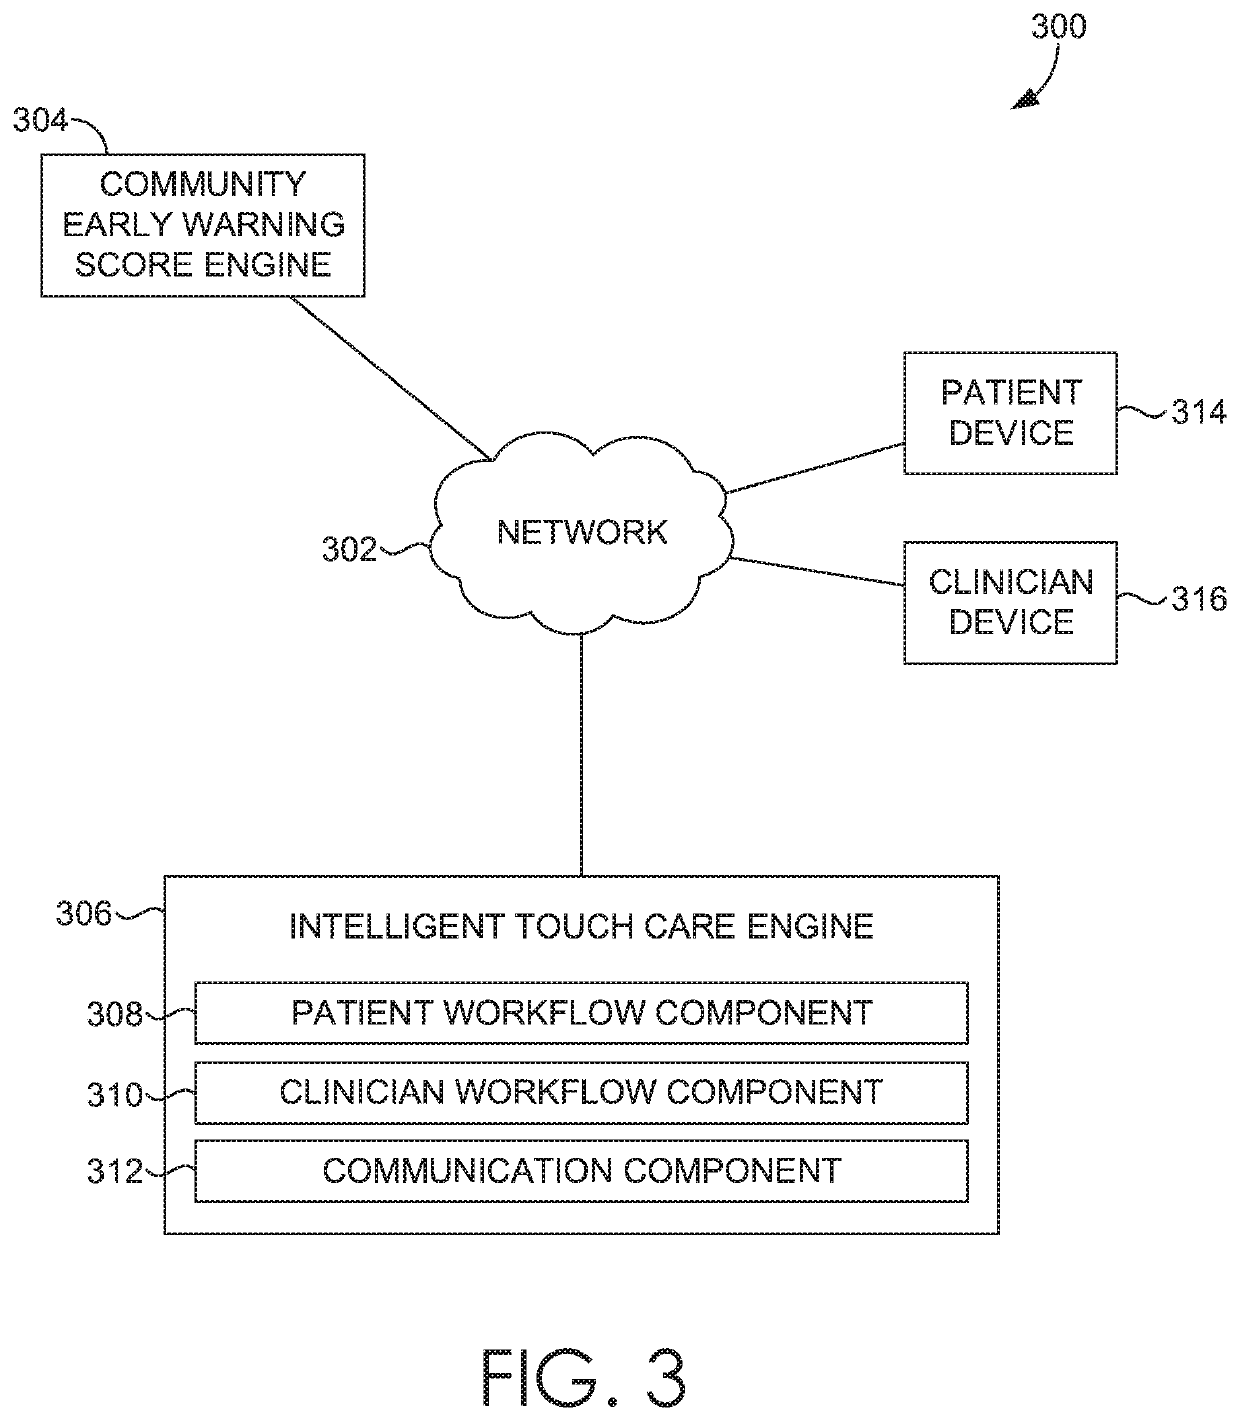 Intelligent touch care corresponding to a patient reporting a change in condition